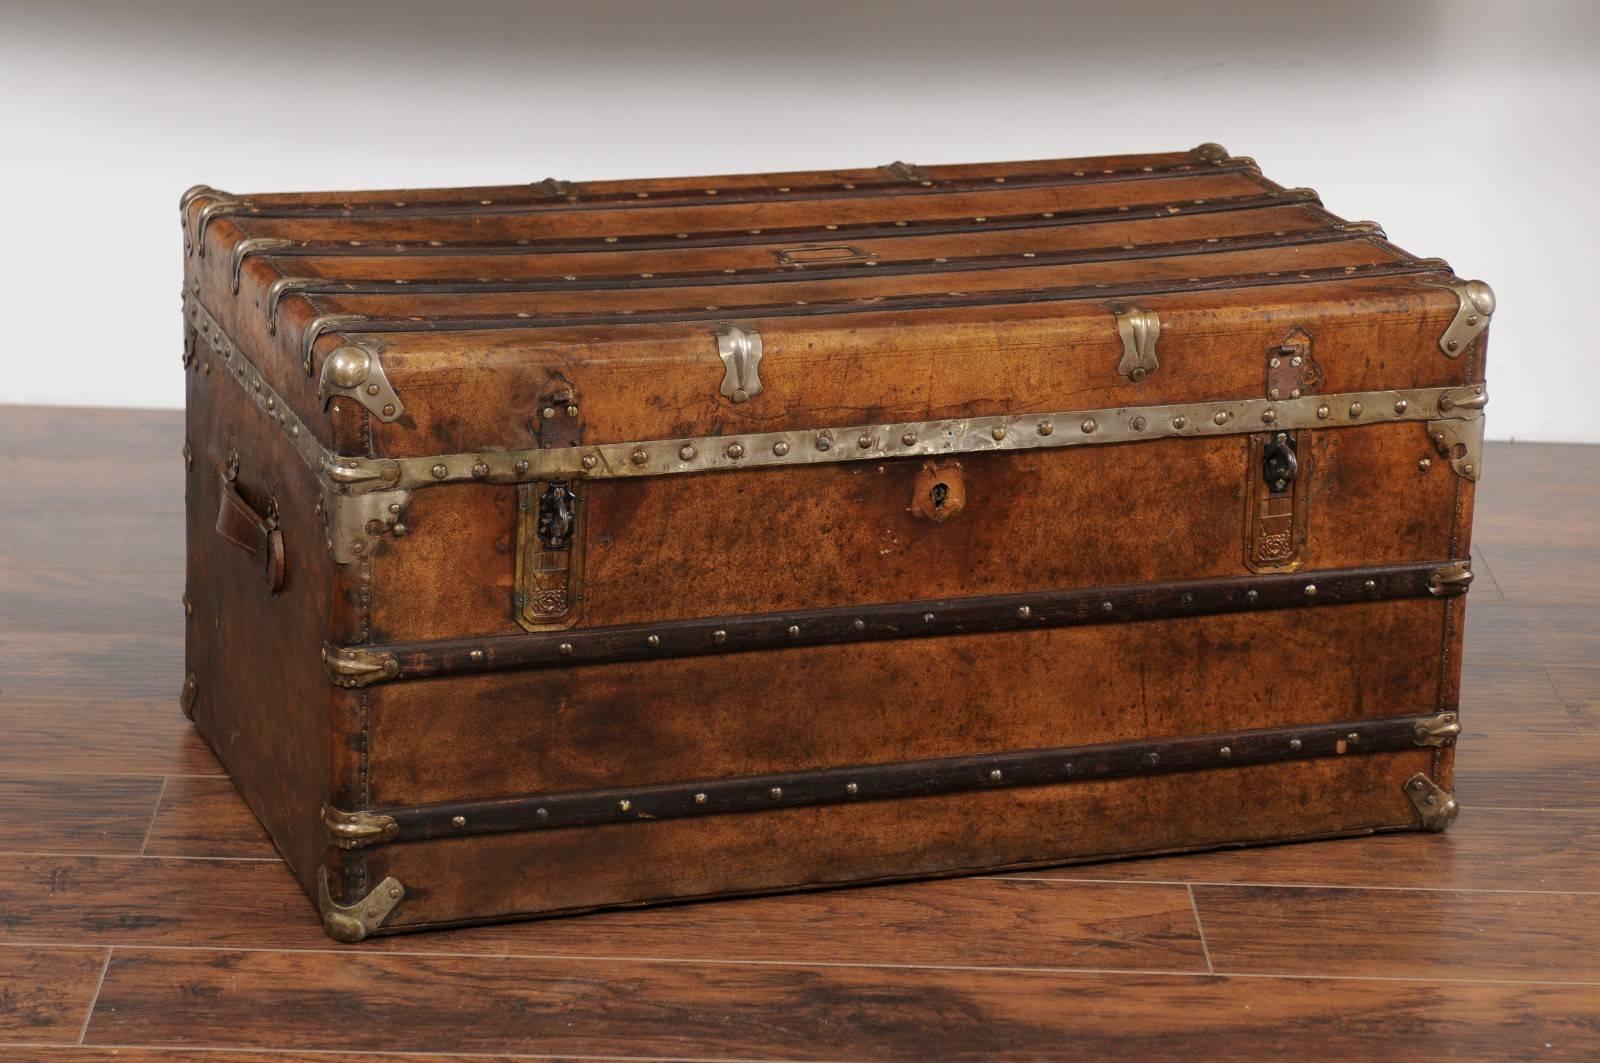 An English leather trunk, zinc lined with lateral handles from the late 19th century. This English leather trunk features a rectangular top, accented with straps and brass details, that lifts up to reveal a zinc lined interior, offering great